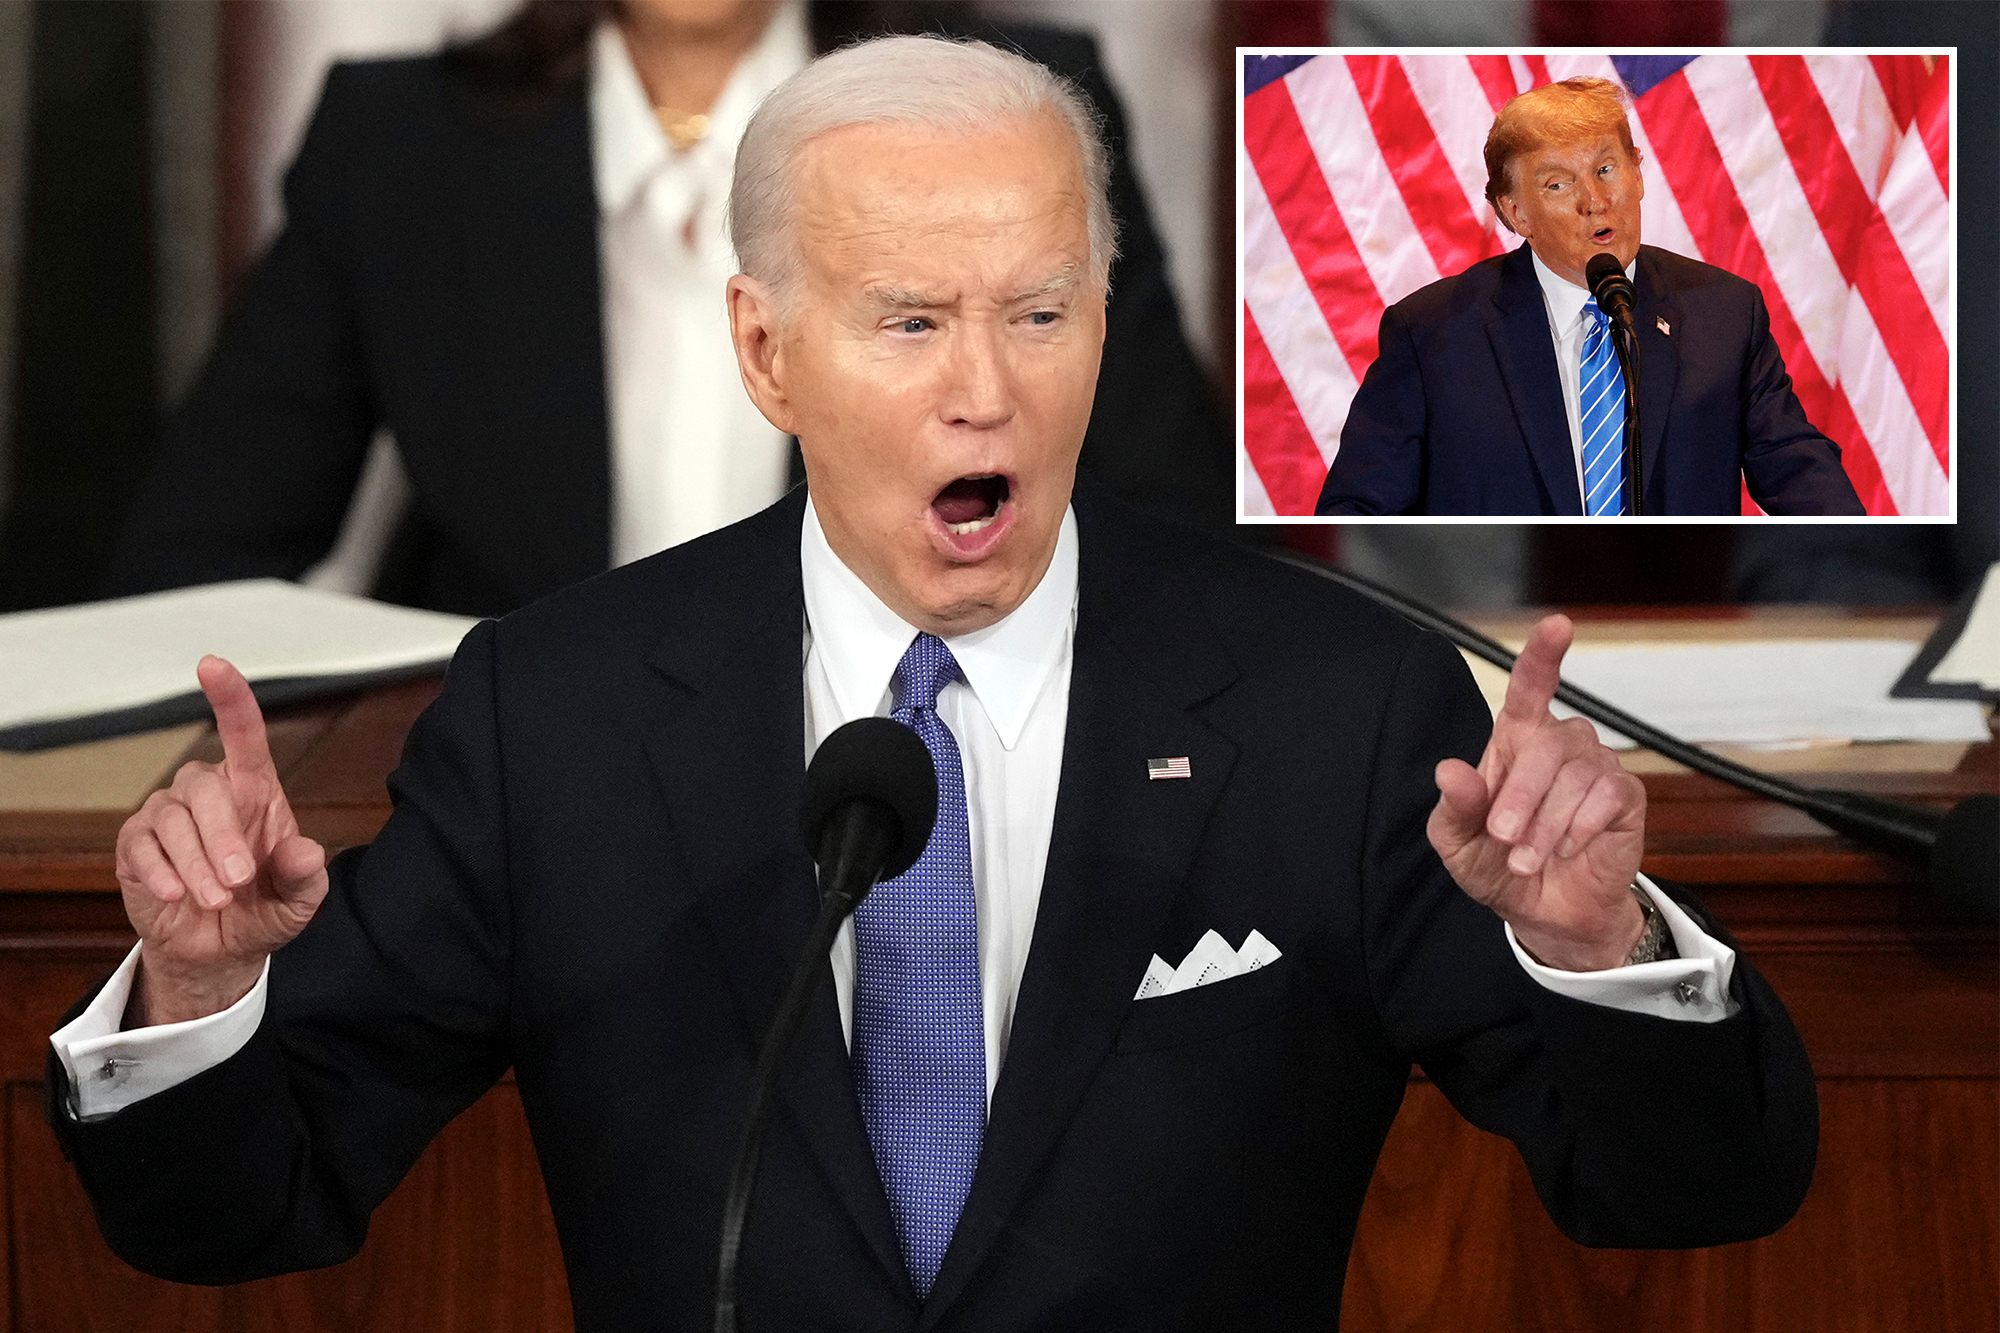 Biden provides burst of energy country doesn’t normally get to see during State of the Union